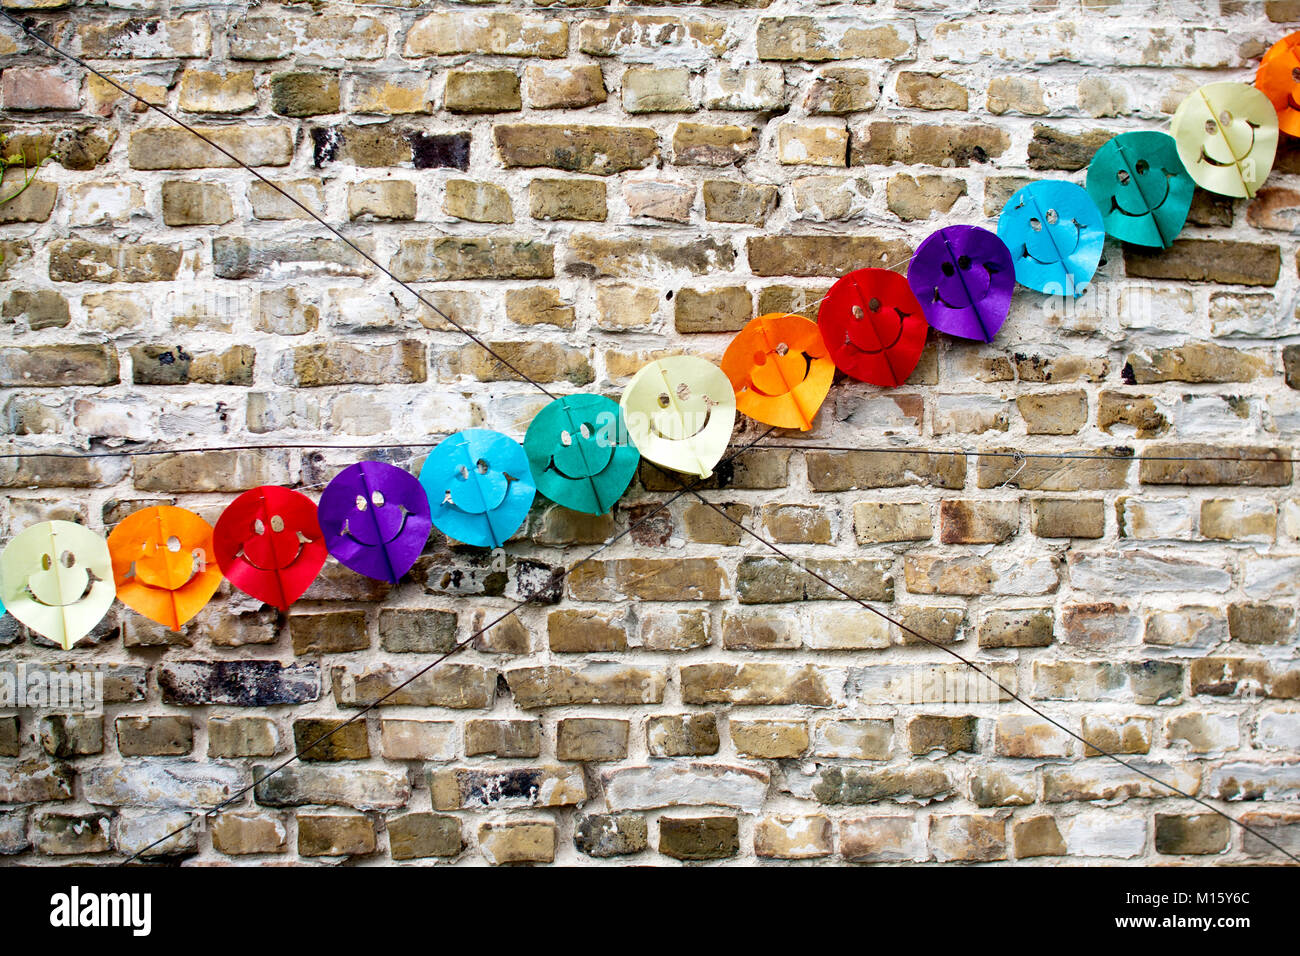 Symbol picture party,decoration,colorful garland with smiley faces on a brick wall Stock Photo